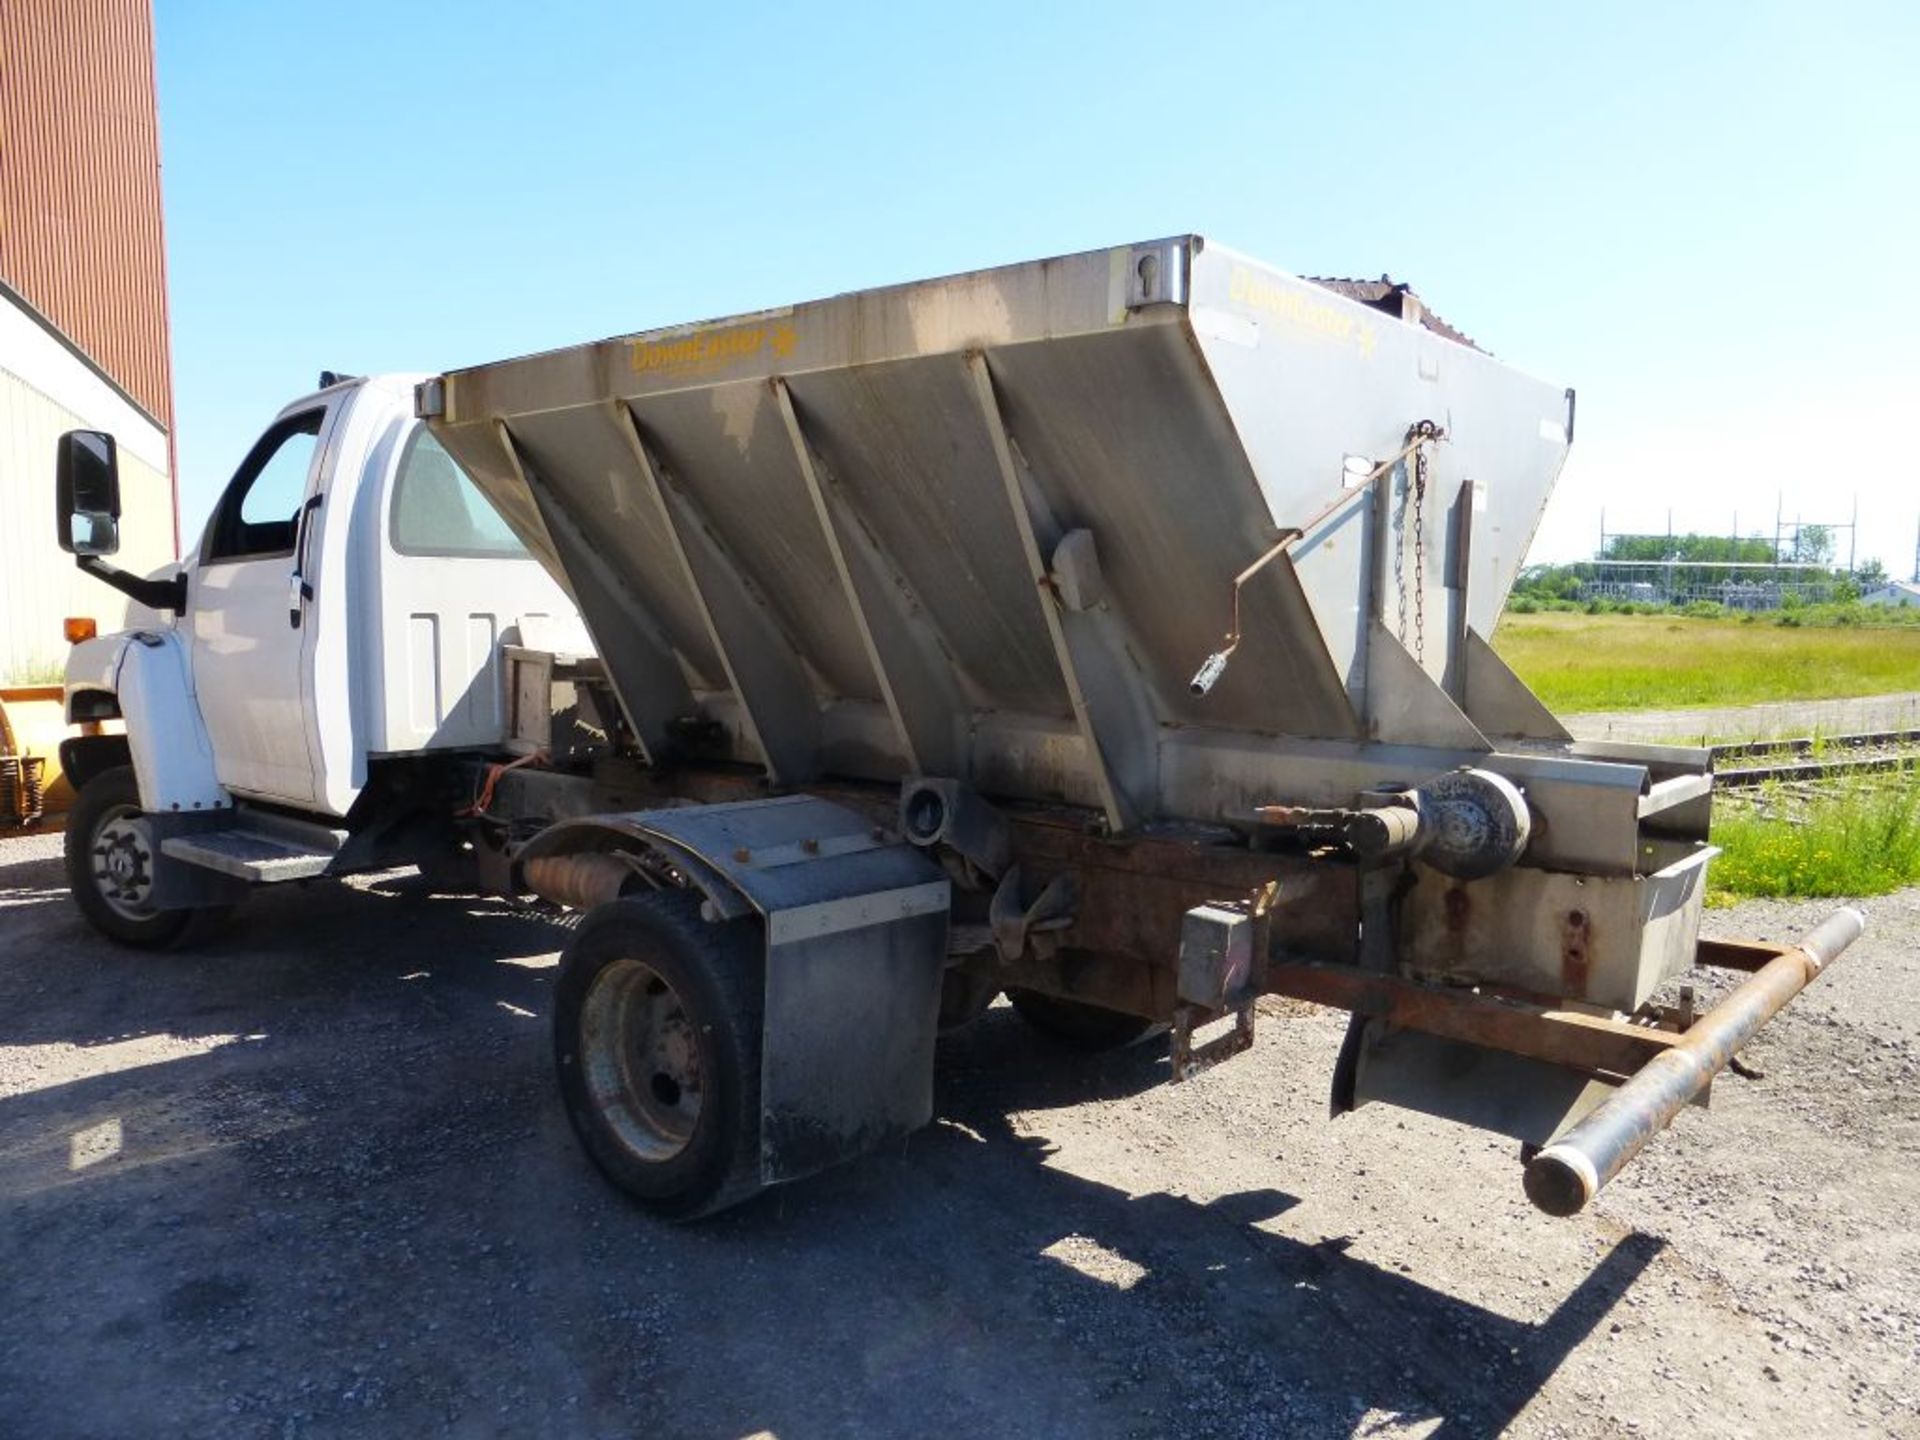 2008 GMC 5500 4x4 Plow Truck with Spreader | Vin No. 1GDE5C3G39F404627; GVWR: 19,500; 15,312 - Image 16 of 29